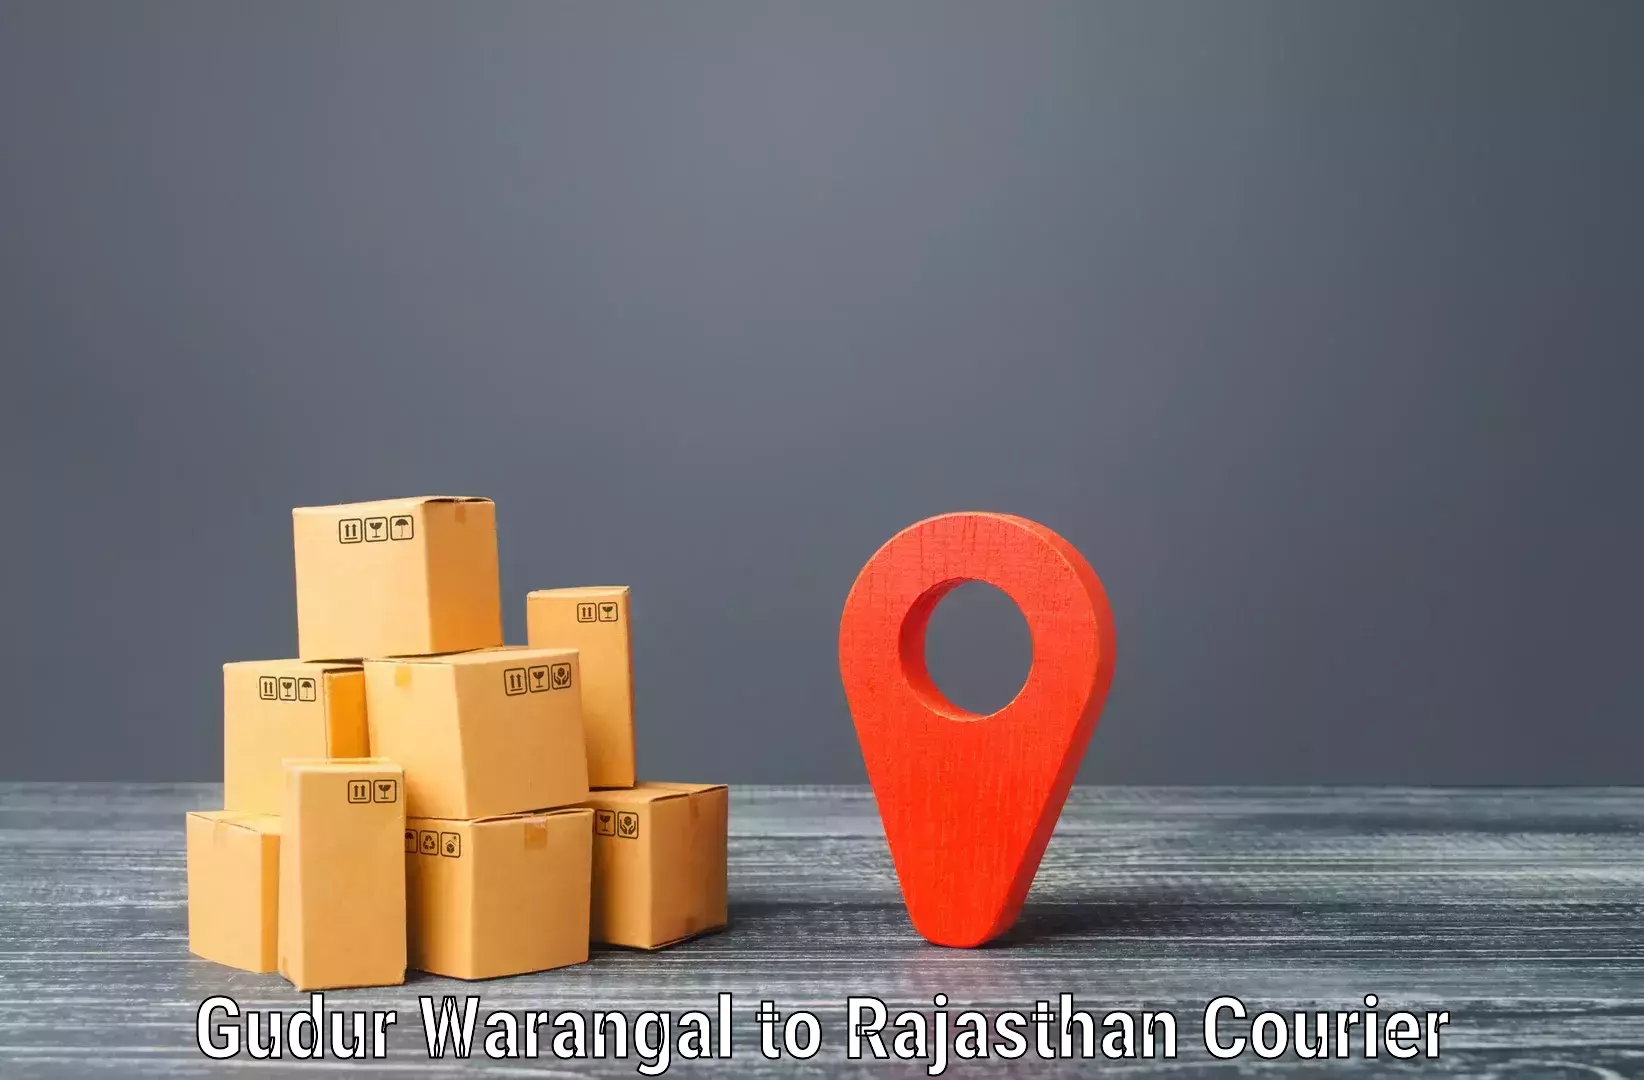 Package delivery network Gudur Warangal to Mahwa